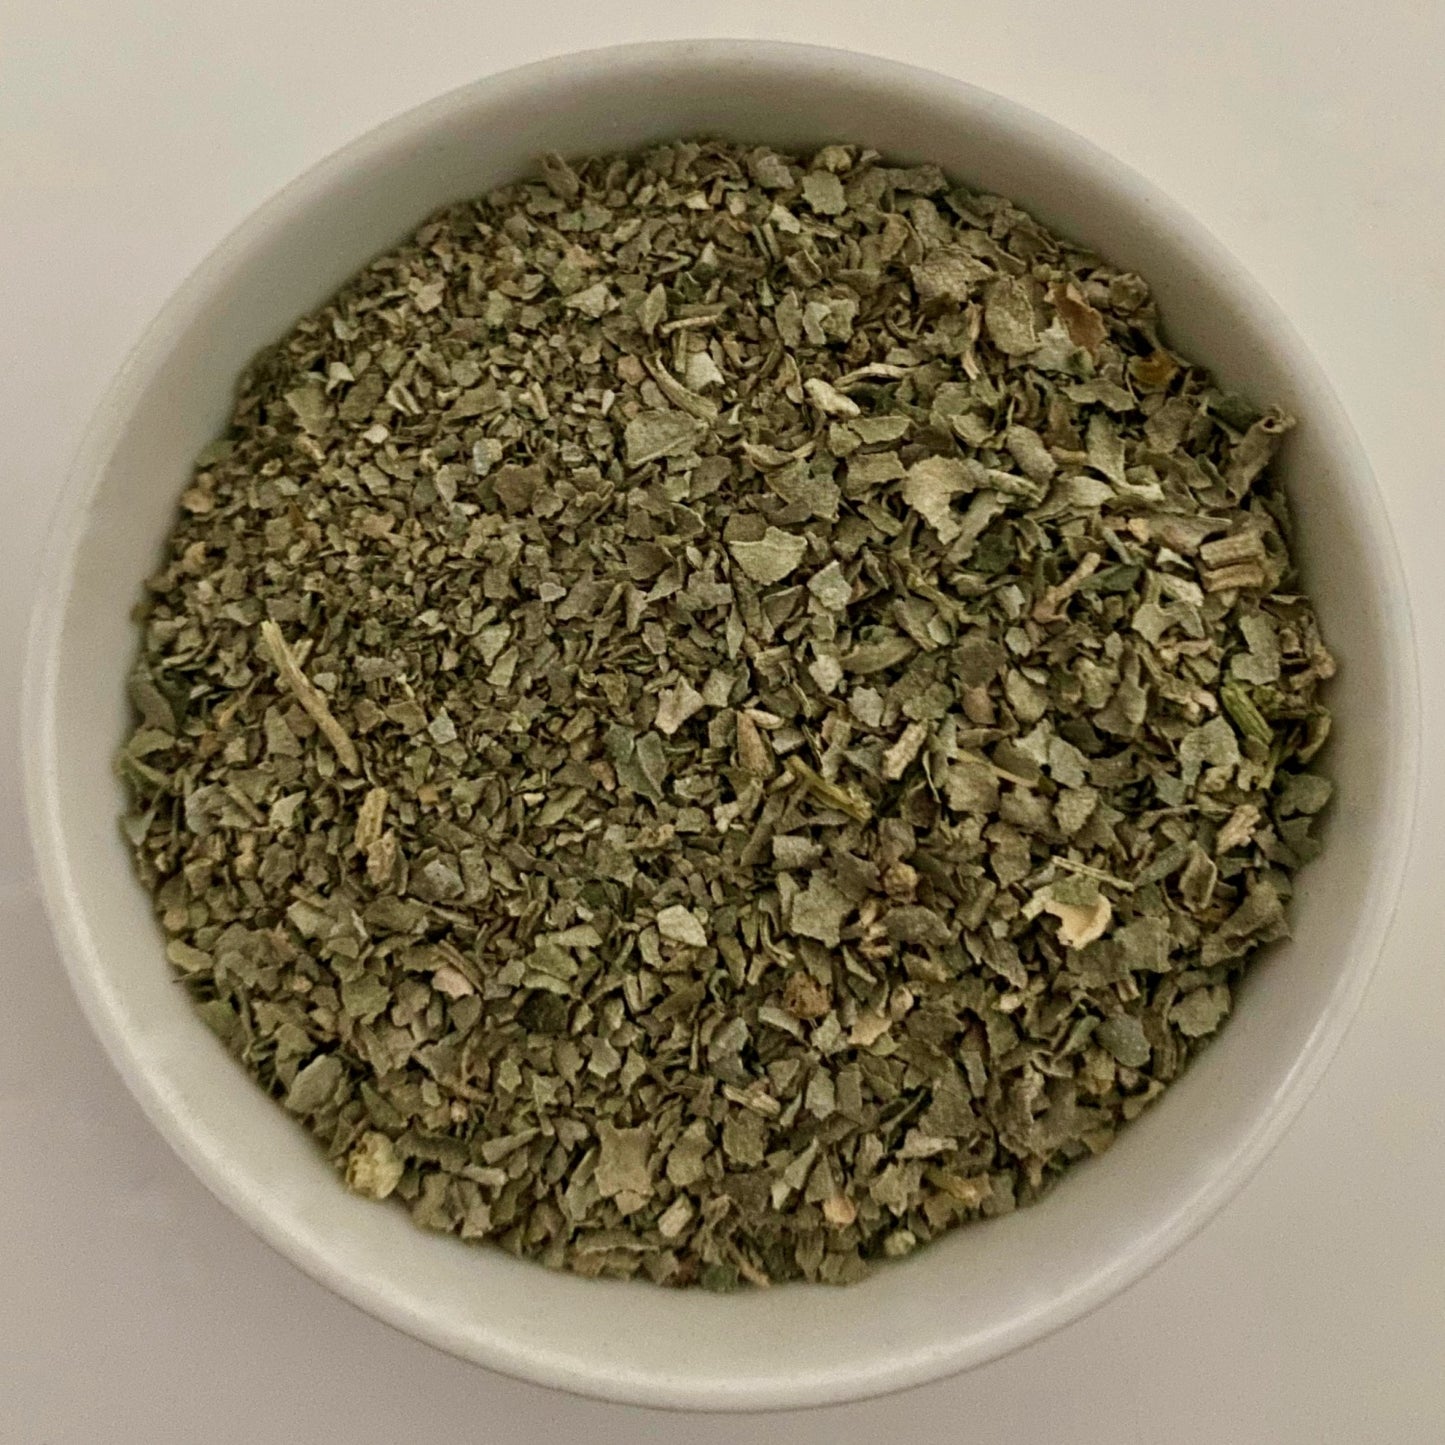 Australian Native Dried Herbs and Spices